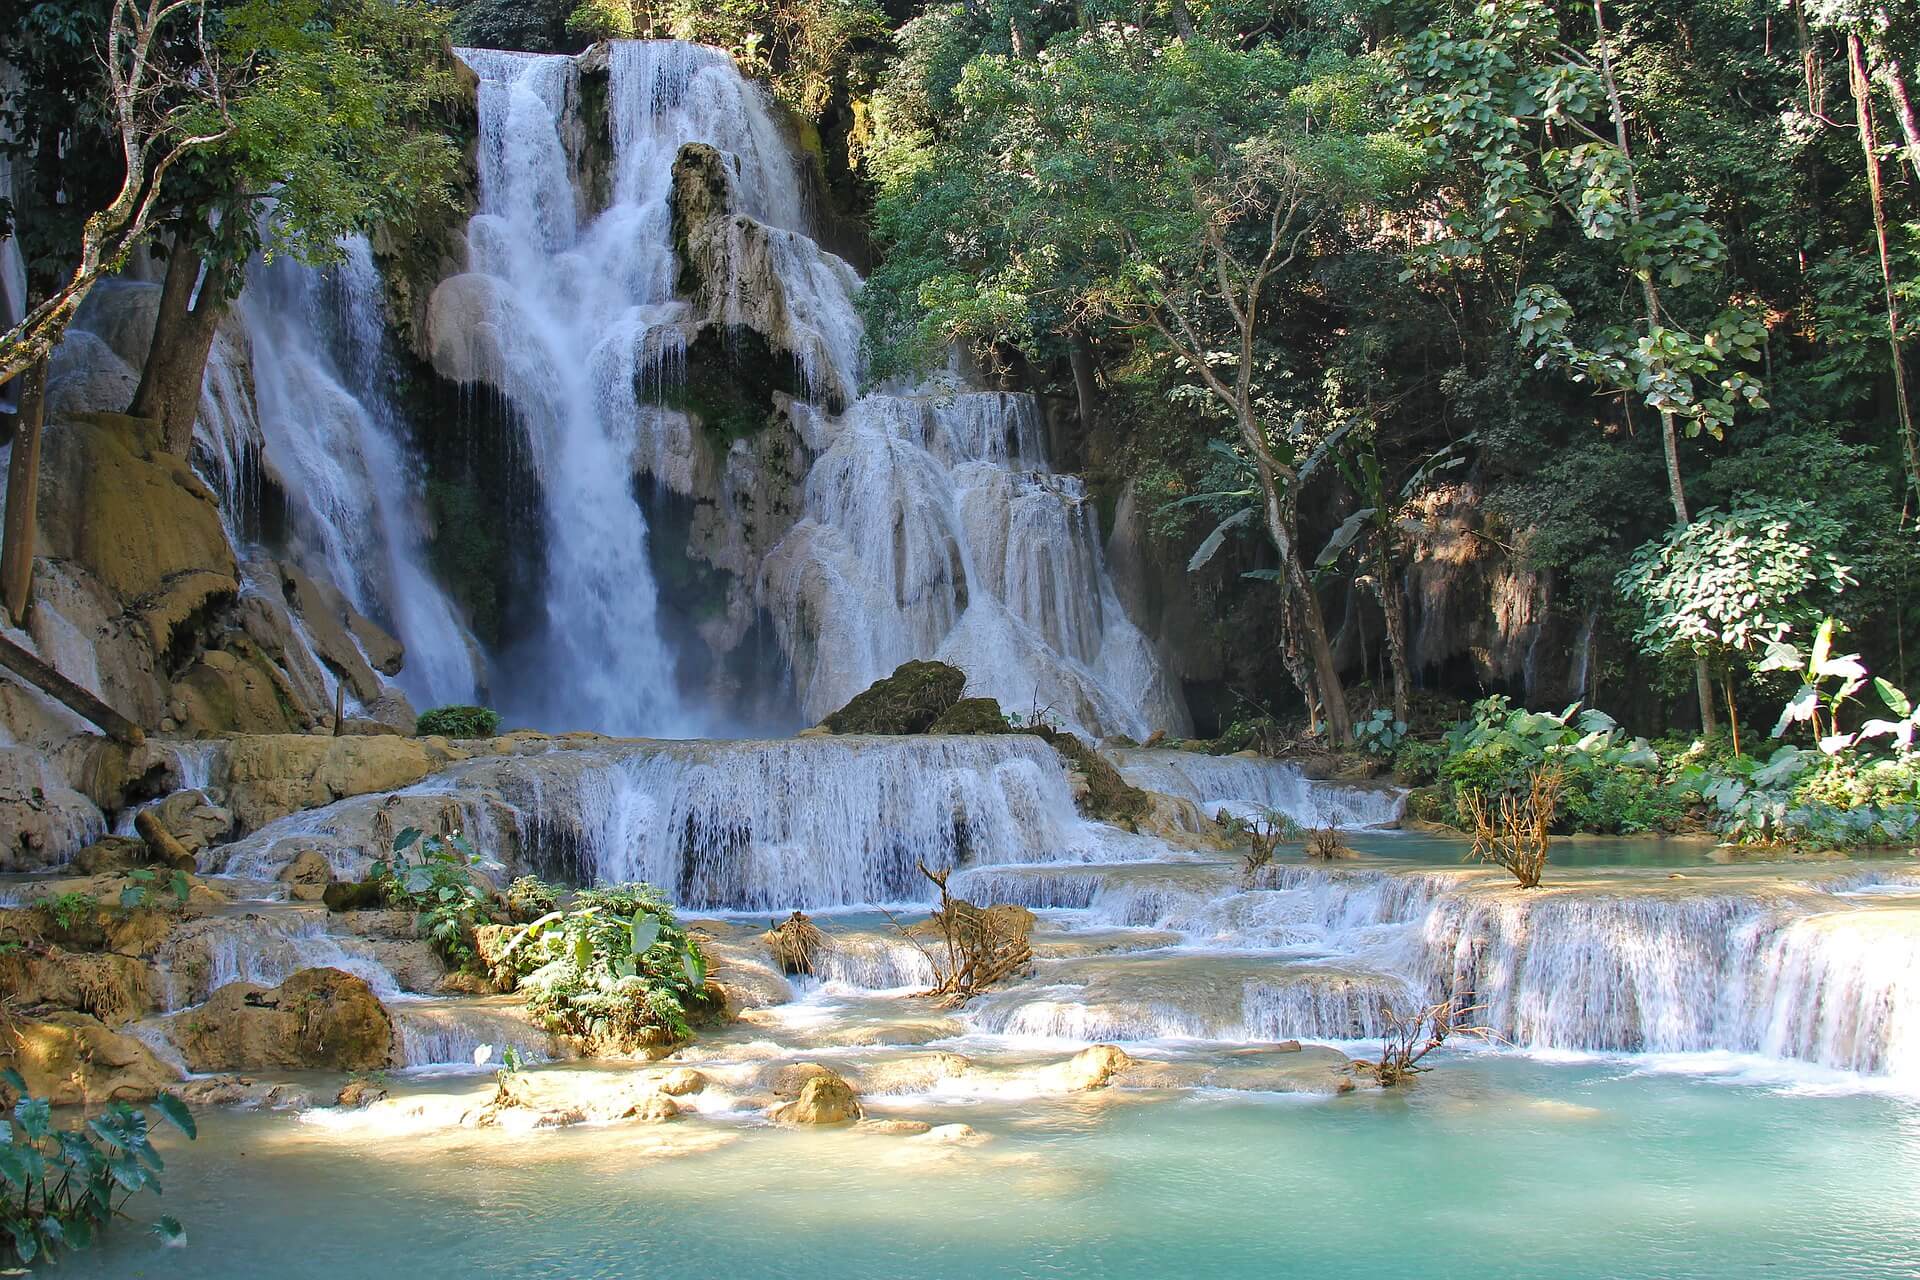 things to do in laos